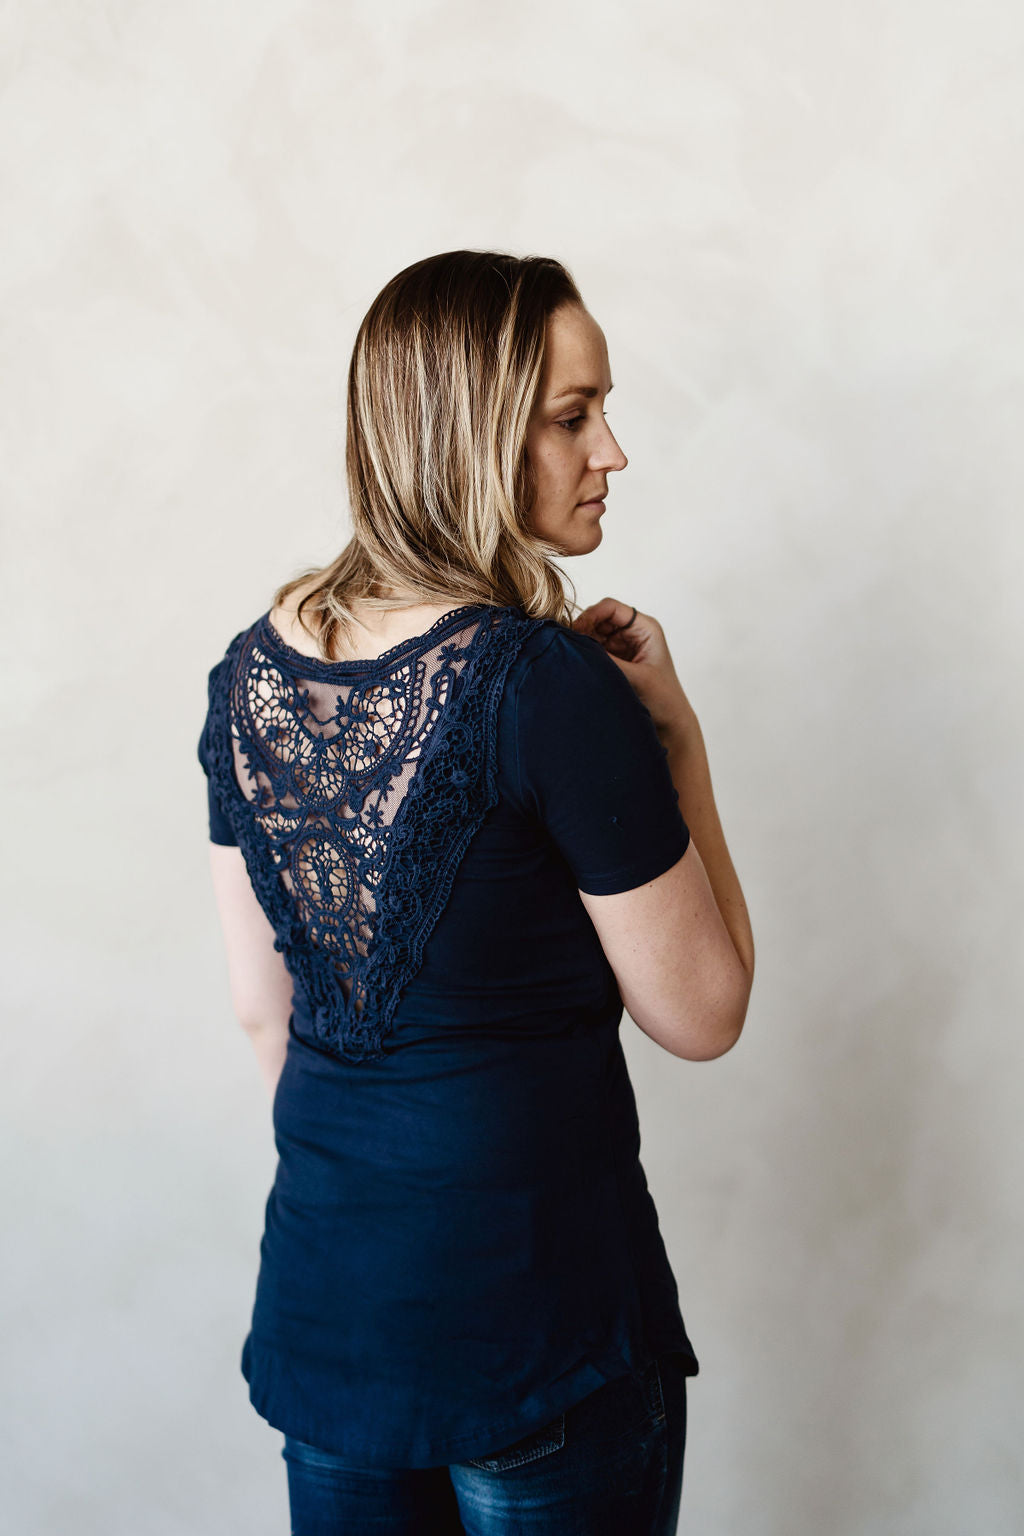 Lace back T-shirt navy reversible 3 in 1 maternity, nursing and postpartum Koallac